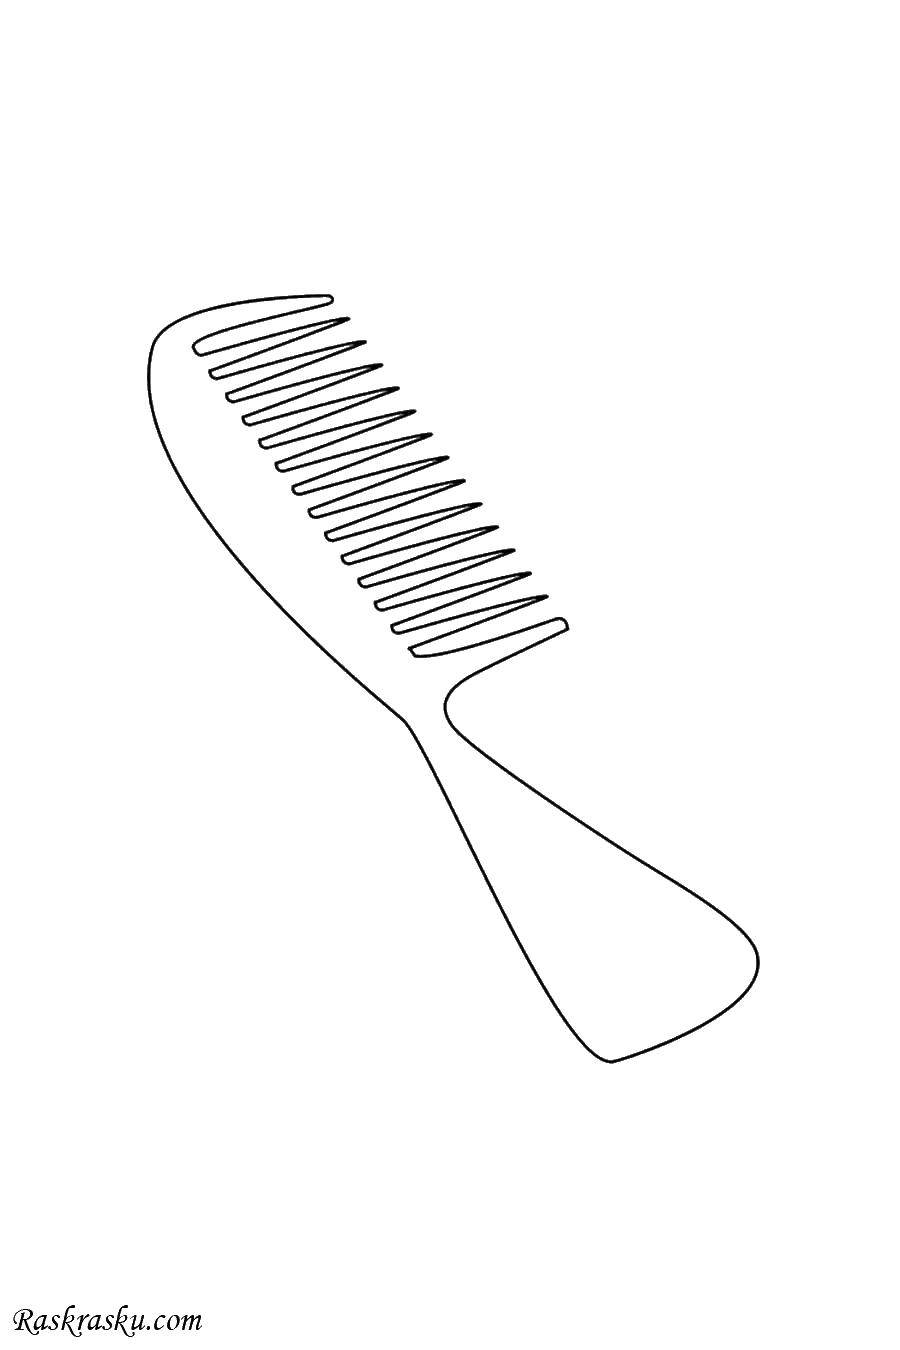 Coloring Comb. Category the objects. Tags:  comb, teeth.